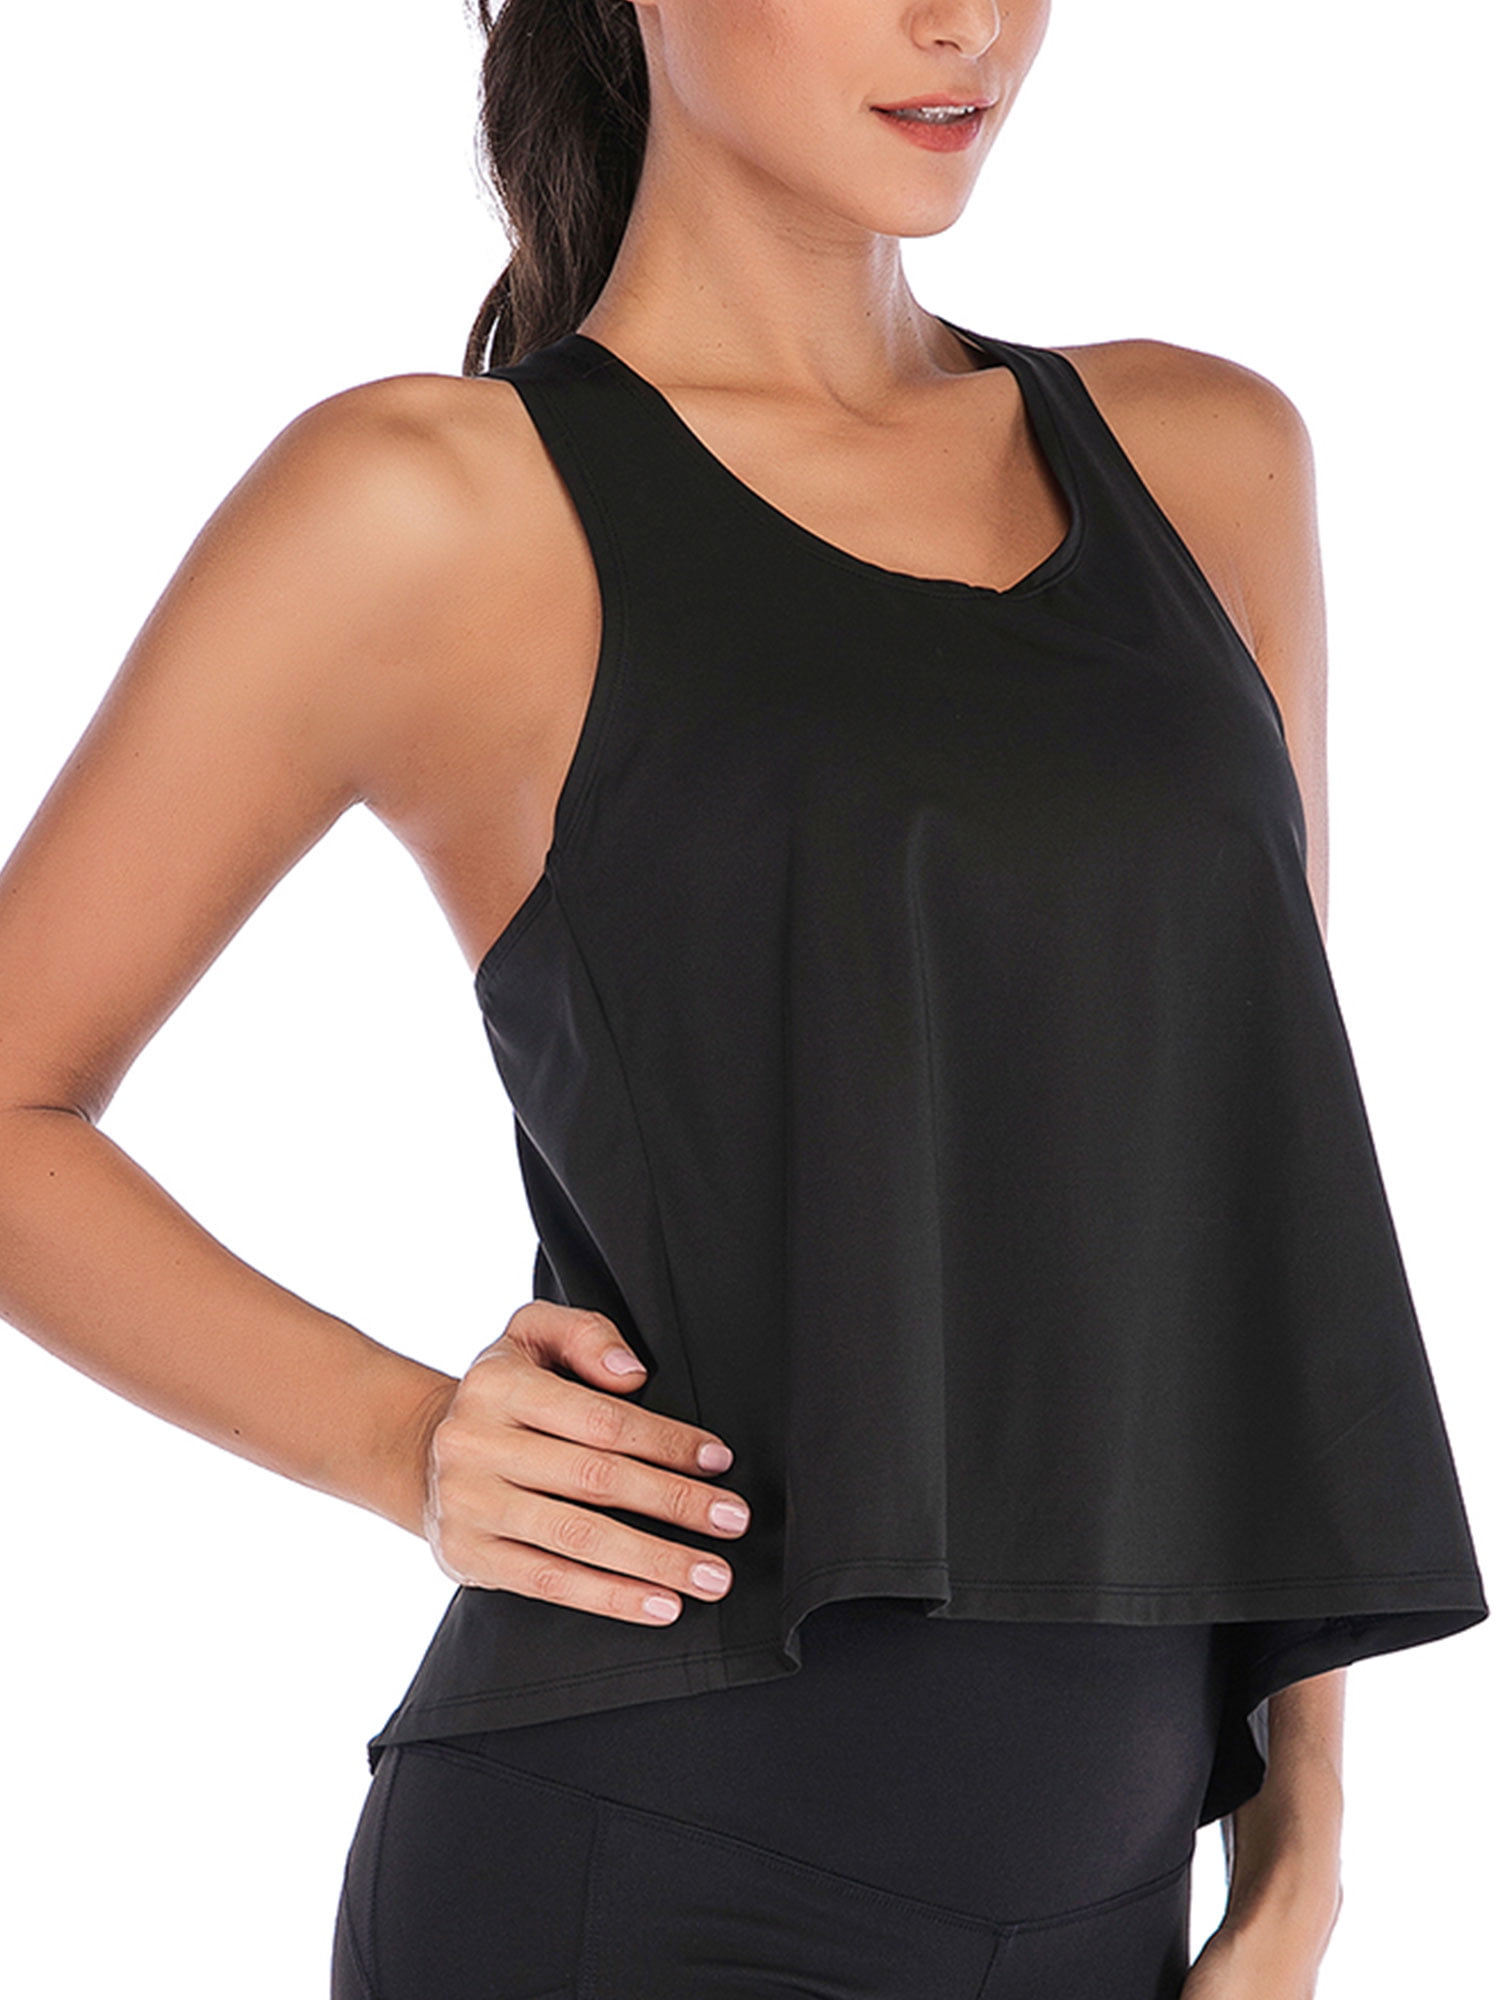 sexy-dance-activewear-vest-tops-for-women-loose-casual-slim-fit-tank-tops-shirt-summer-ladies